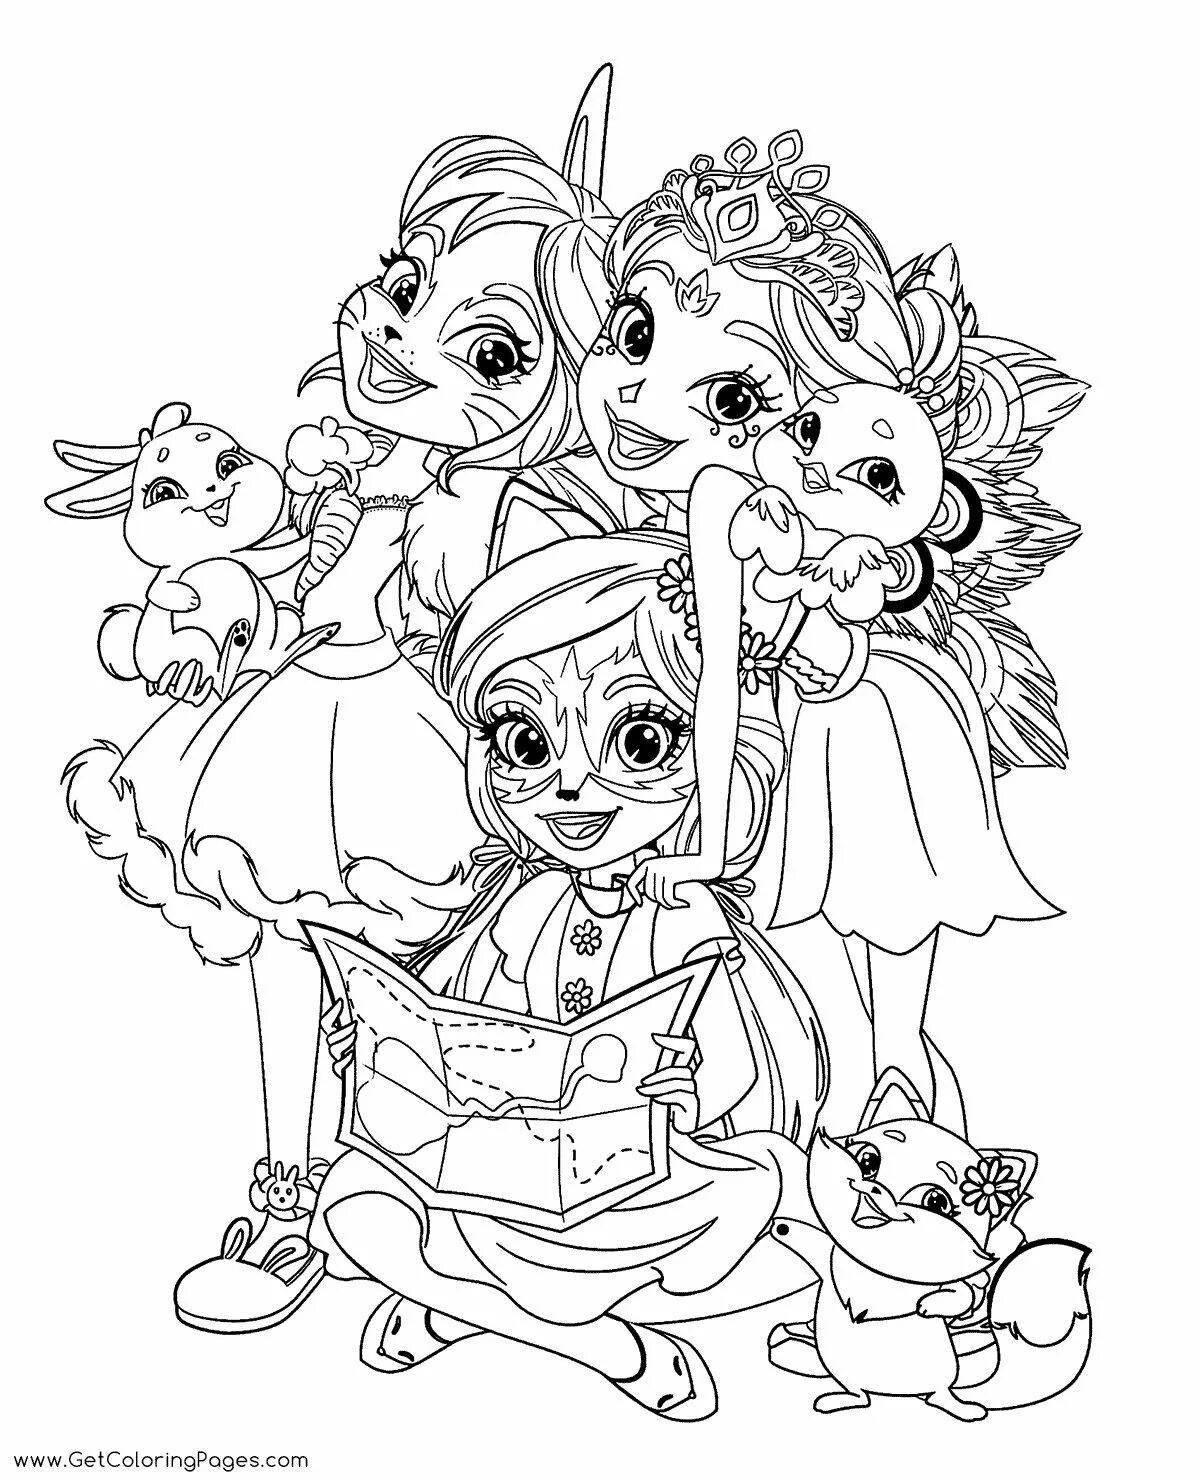 Amazing coloring pages for girls